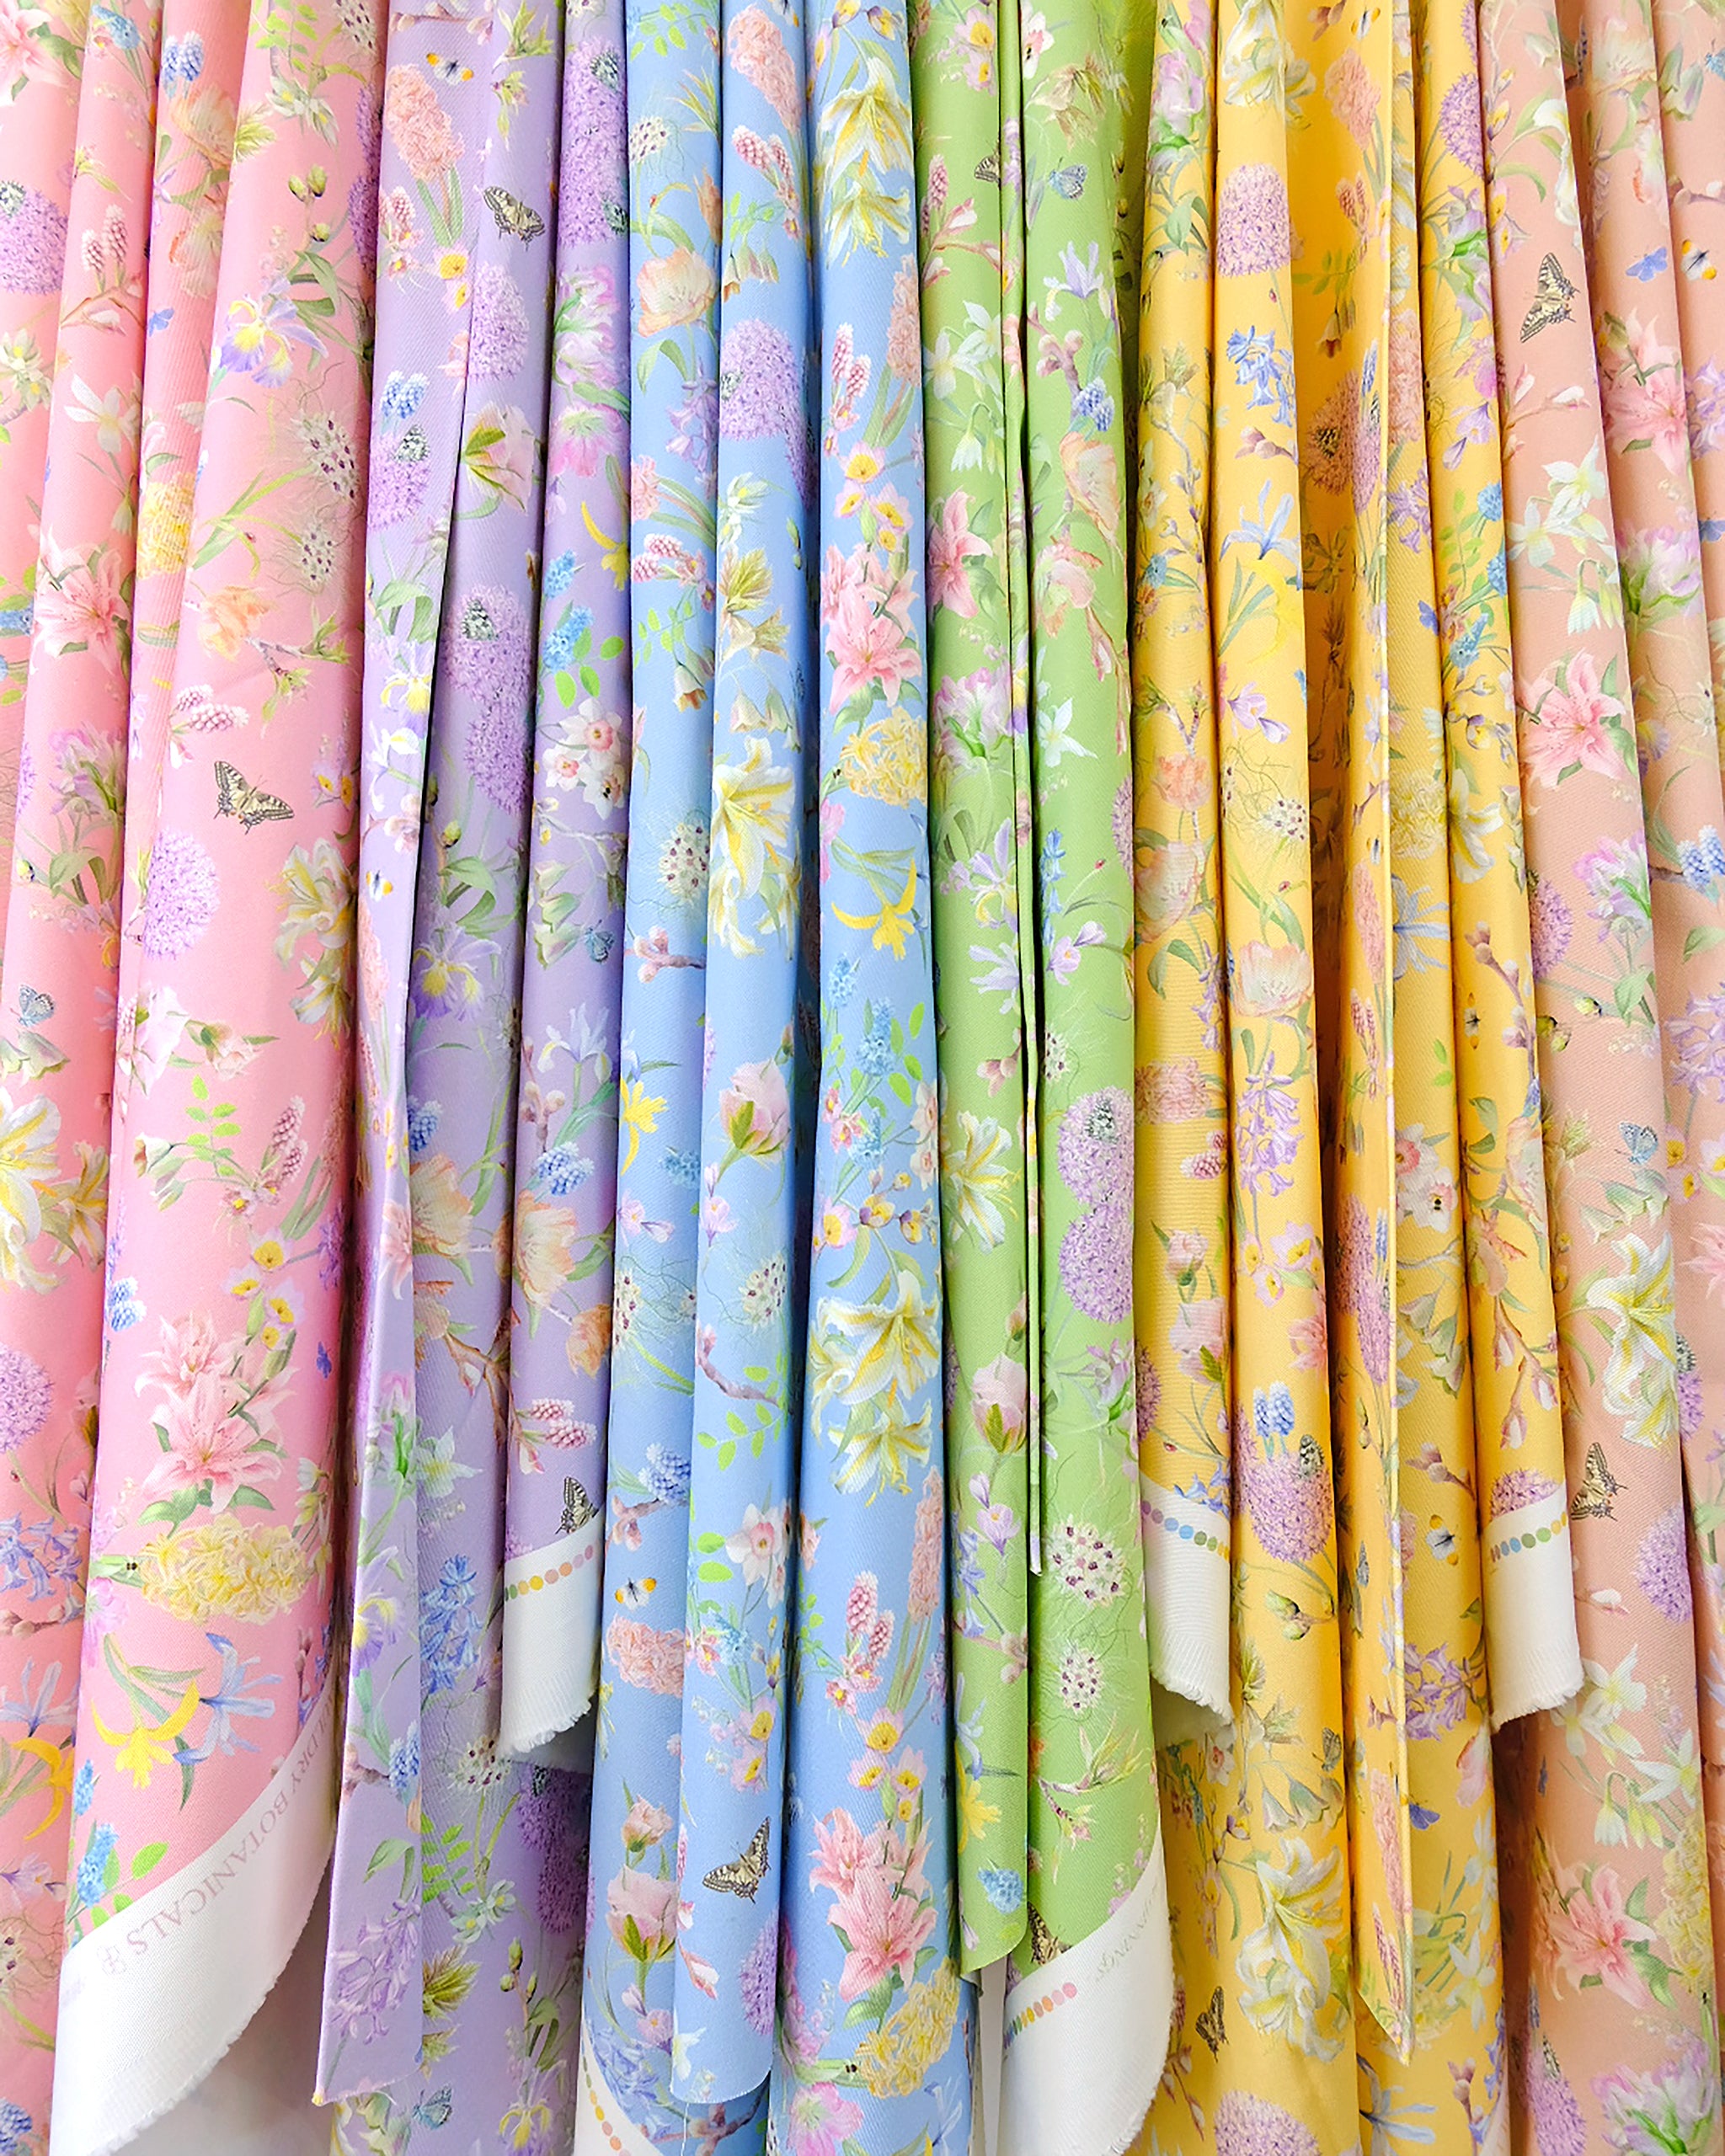 100% organic cotton twill fabric in a luxury delicate botanical pattern for sustainable colourful interiors.